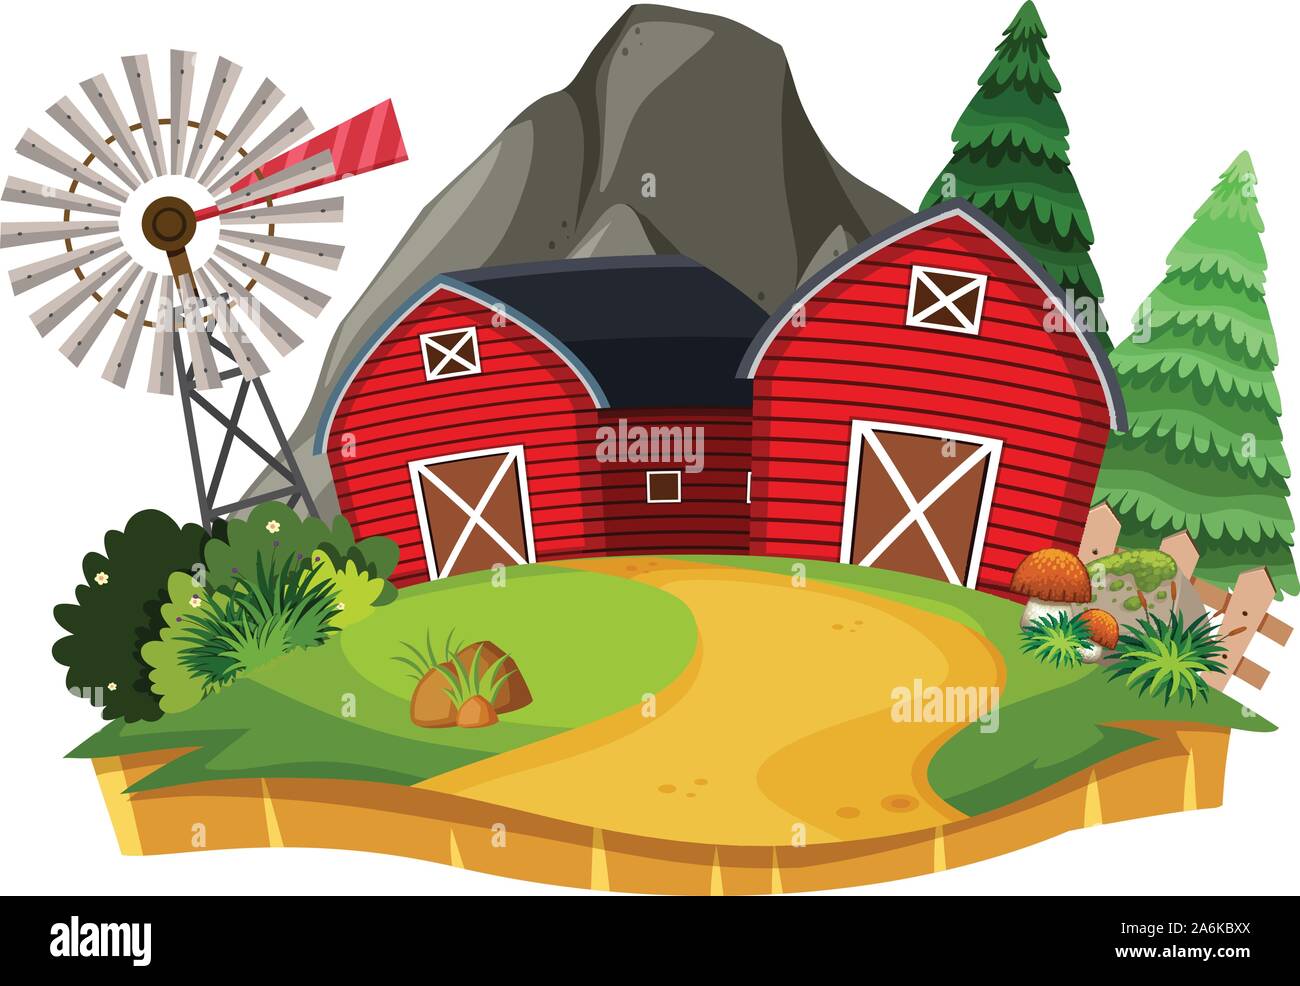 Nature landscape of farmland with red barn illustration Stock Vector